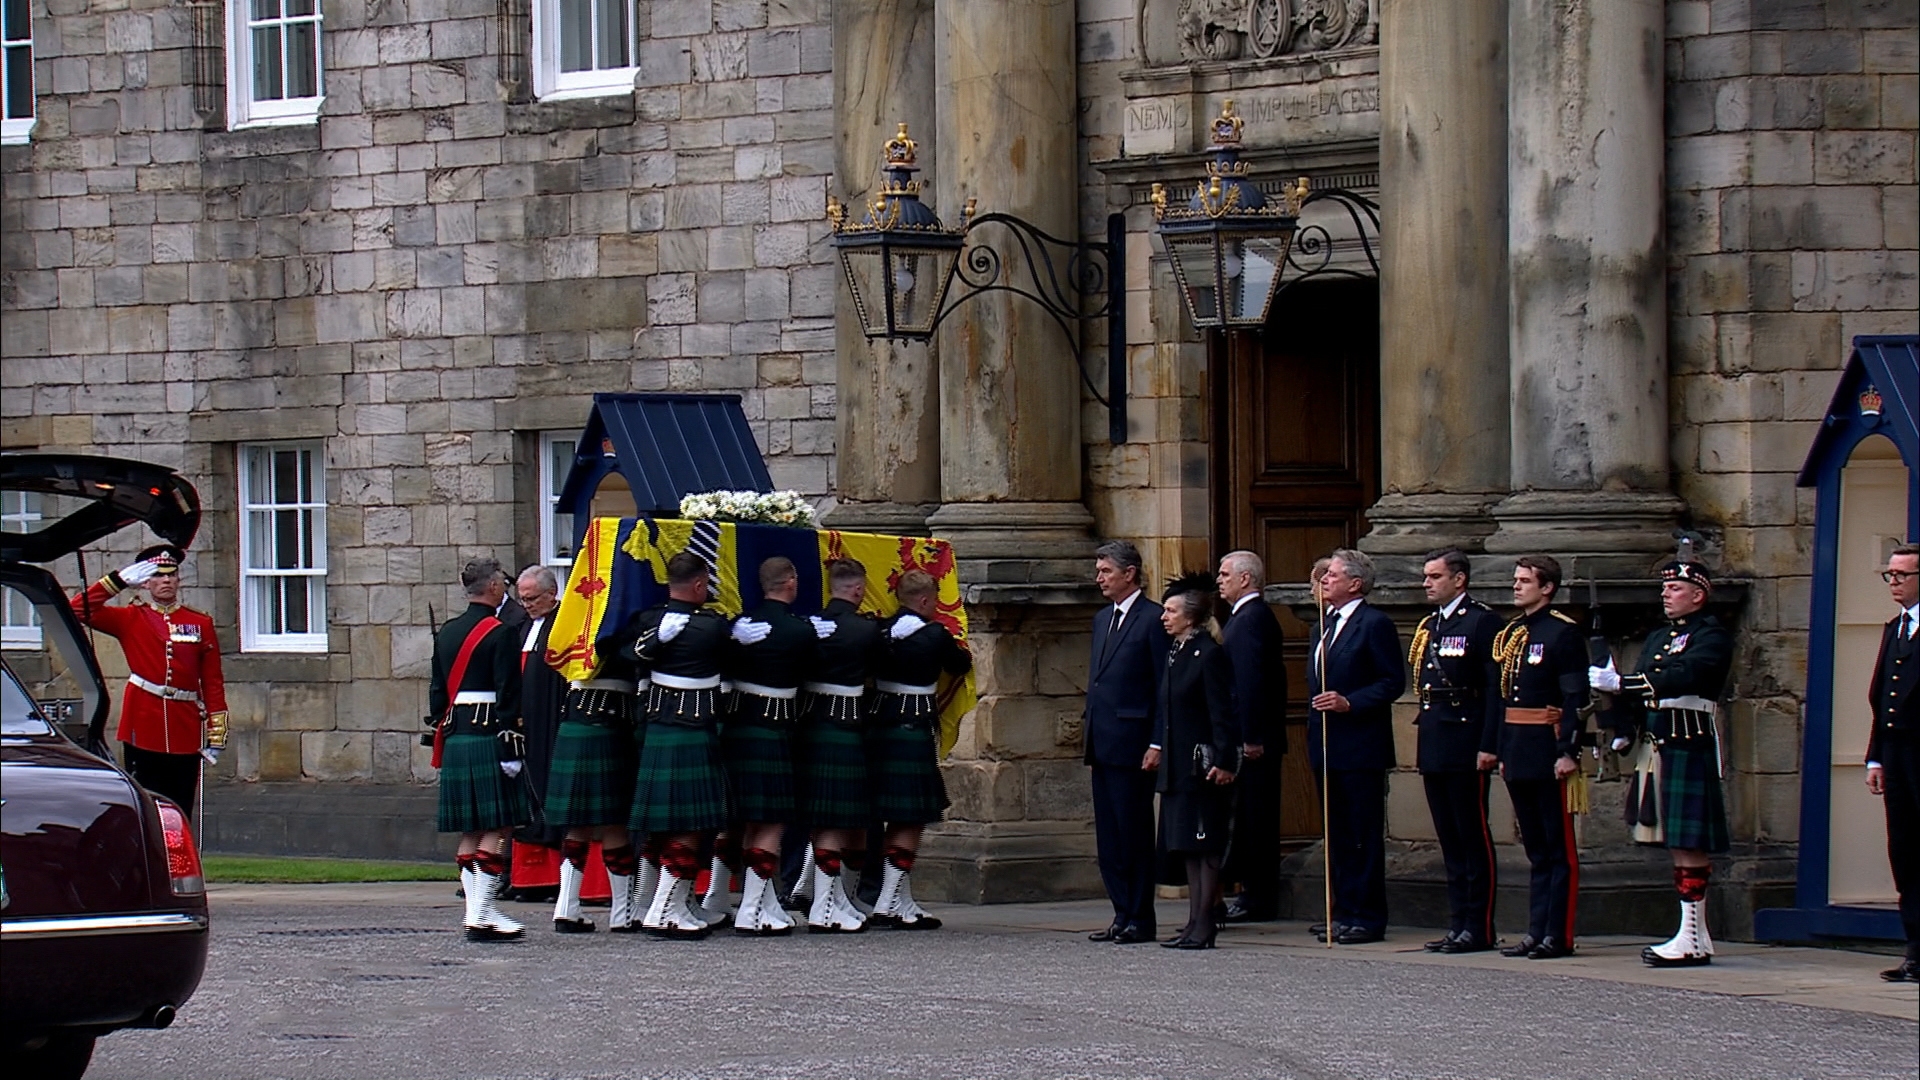 The Queen's coffin was carried into the Palace of Holyroodhouse in Edinburgh on Sunday.